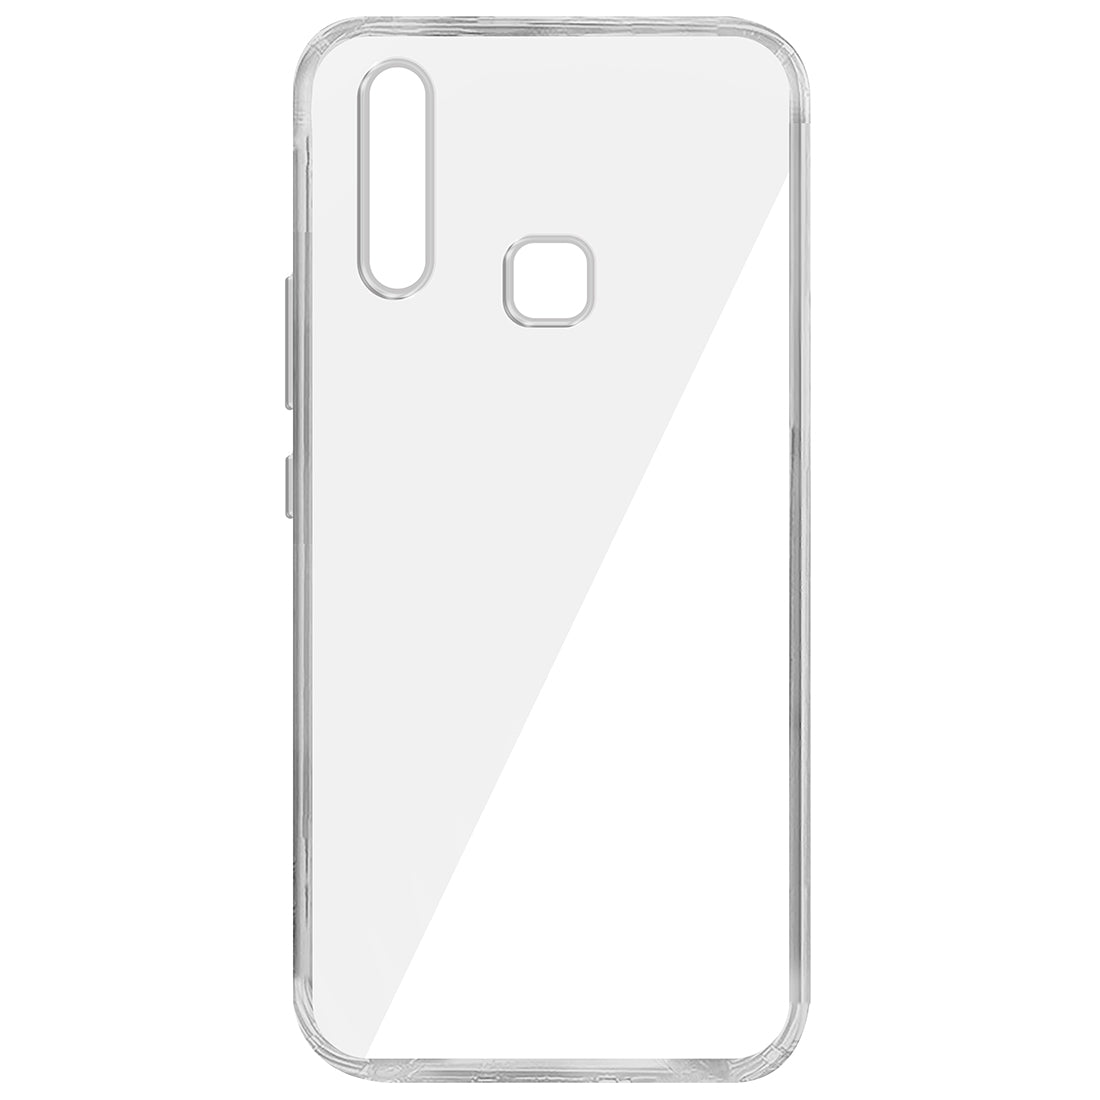 Clear Case for Vivo Y17